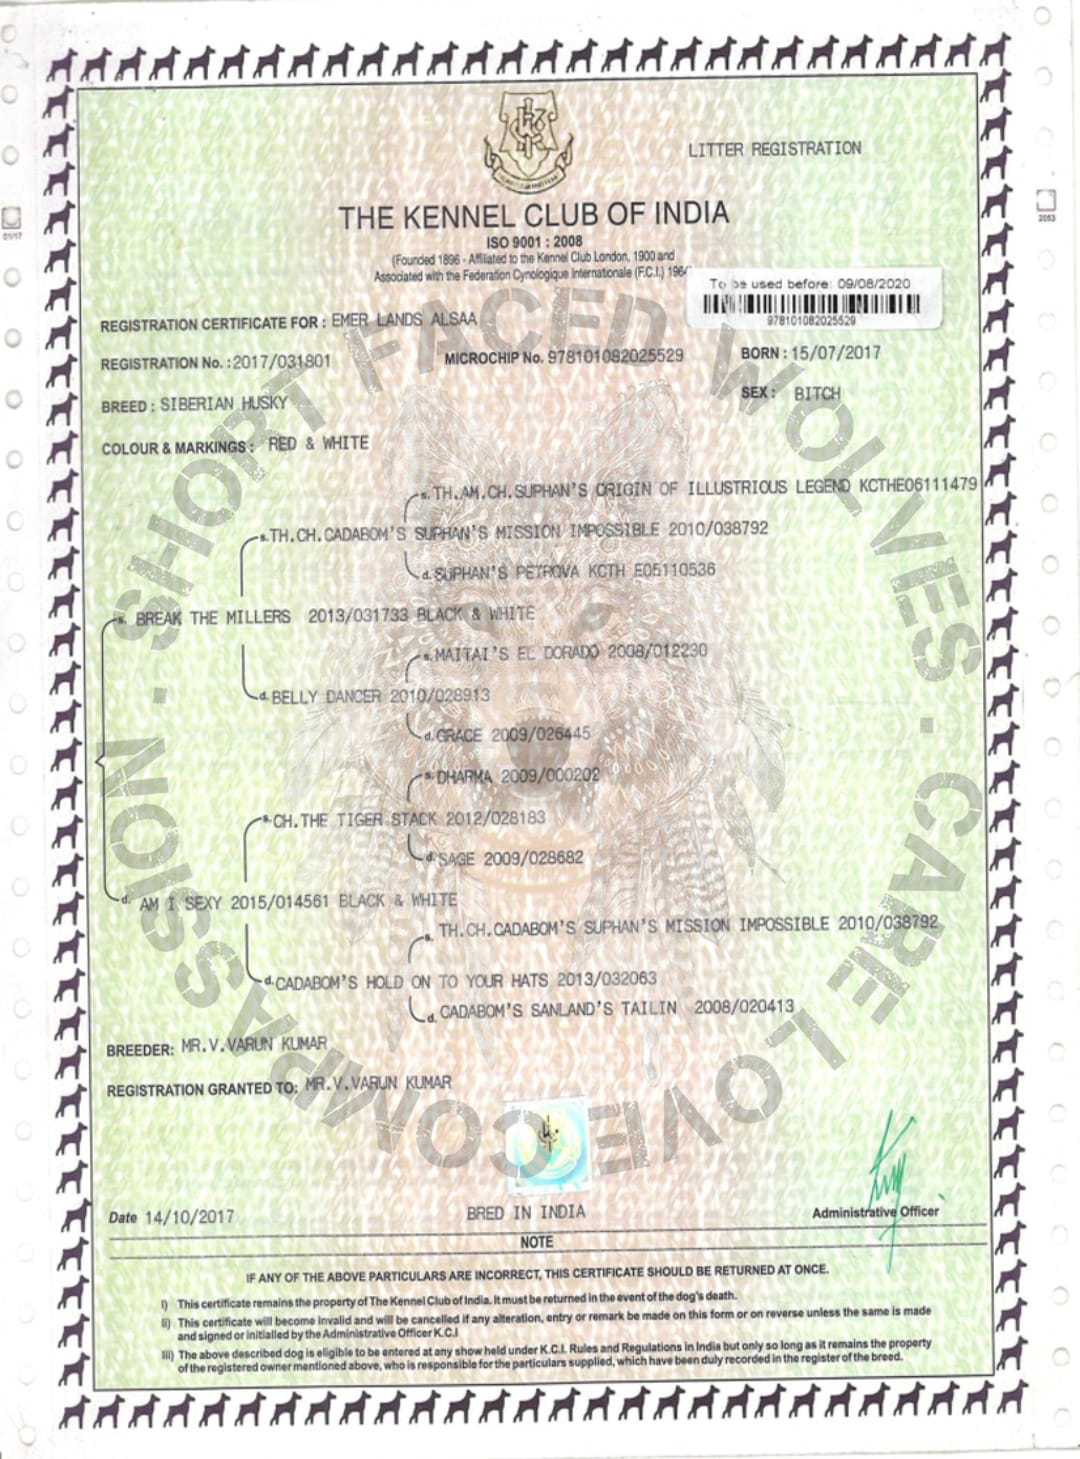 KCI Certificate of Registration of the Dam